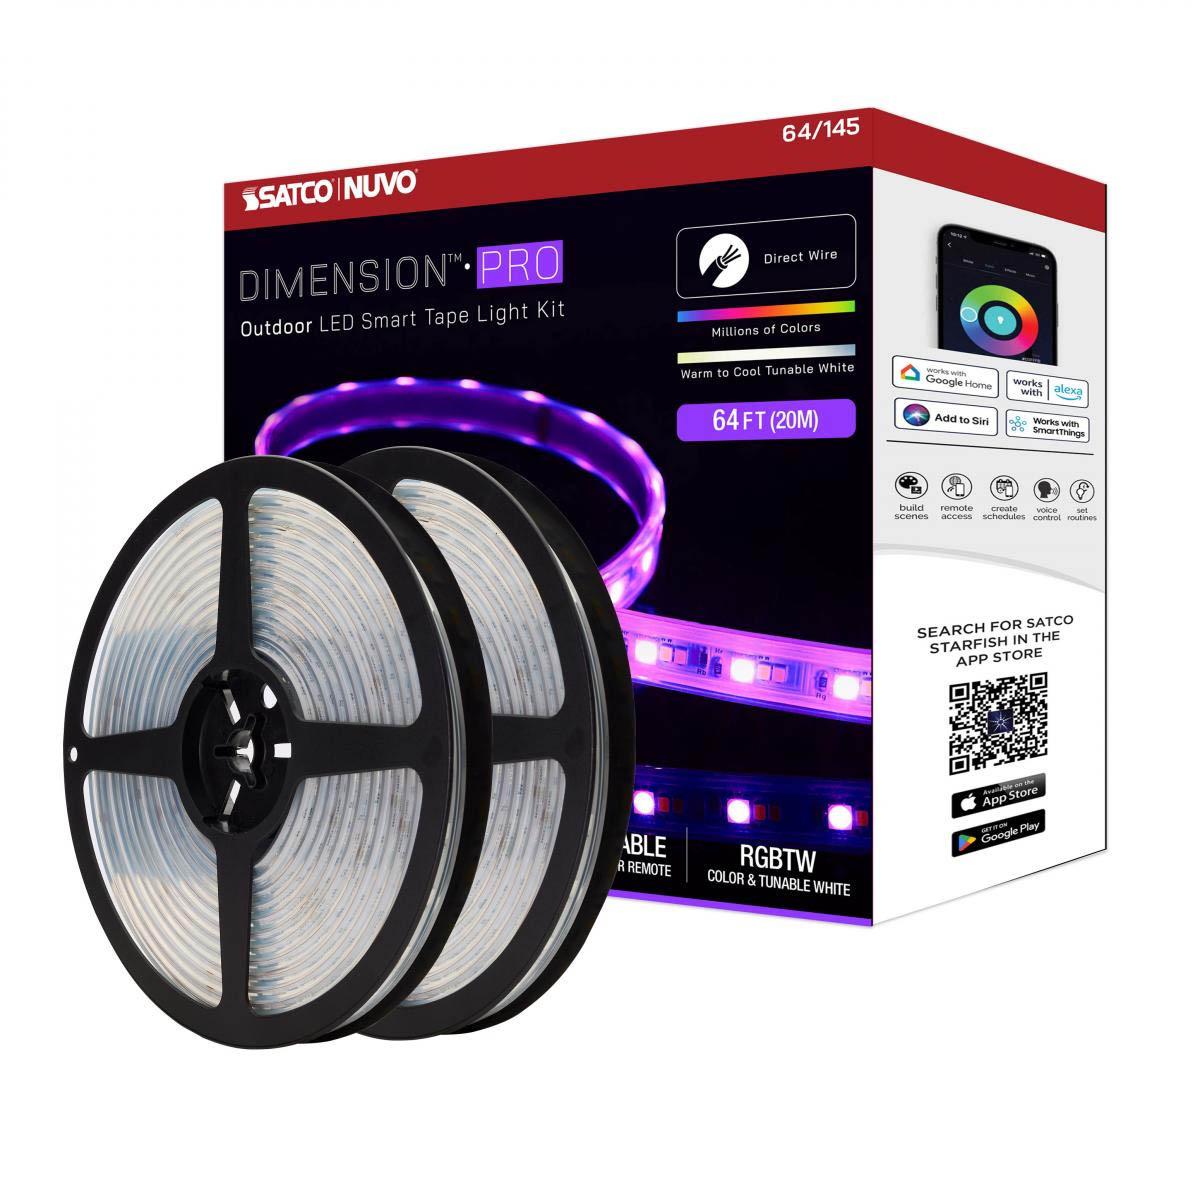 Dimension Pro Outdoor Smart LED Tape Light Kit with Remote, 65ft Reel, Color Changing RGB and Tunable White, 24V, J-Box Connection